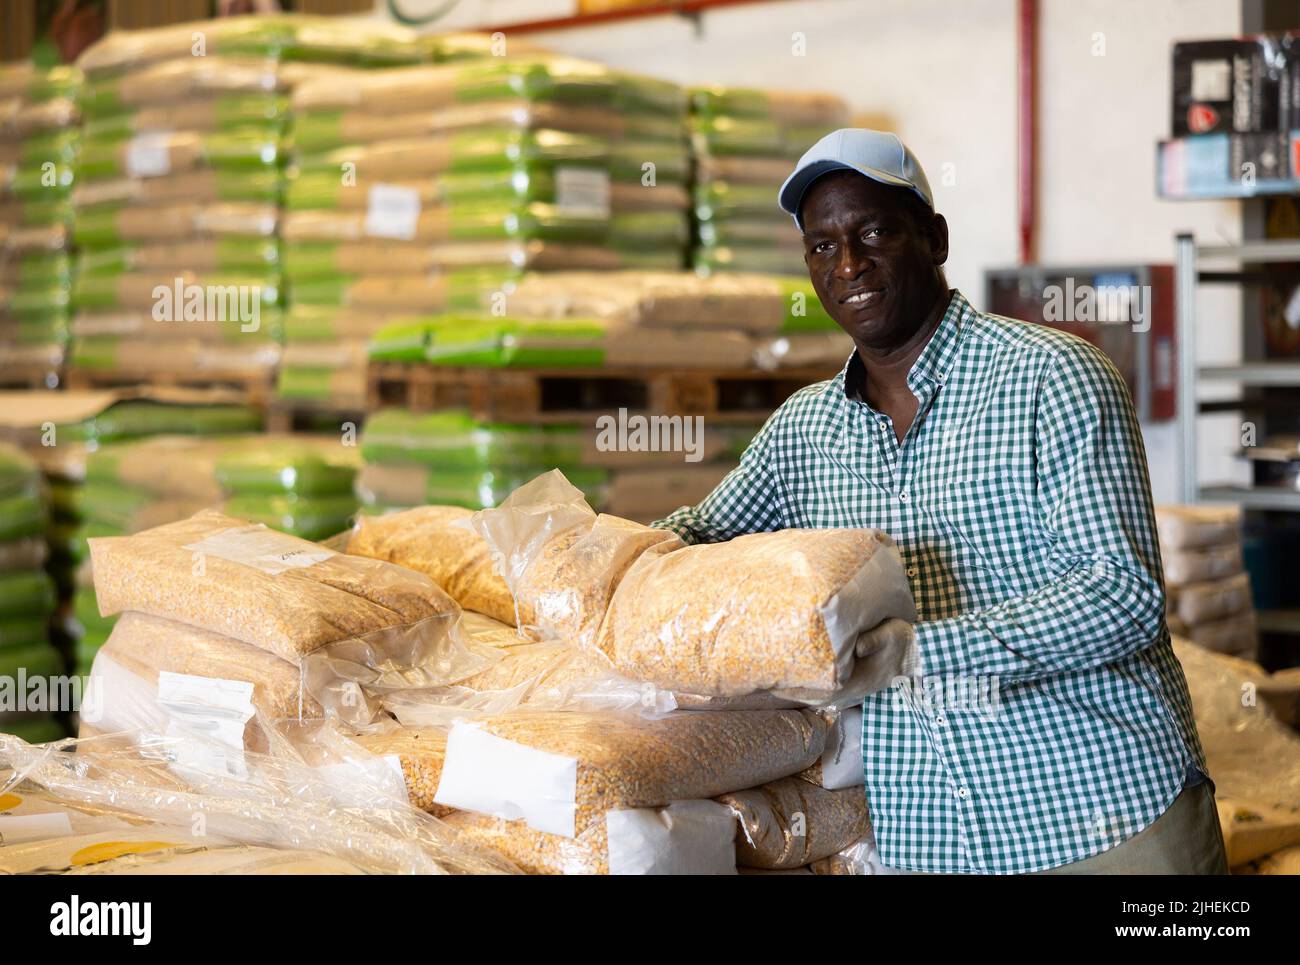 Man working in warehouse, carrying bag full of corn seeds Stock Photo